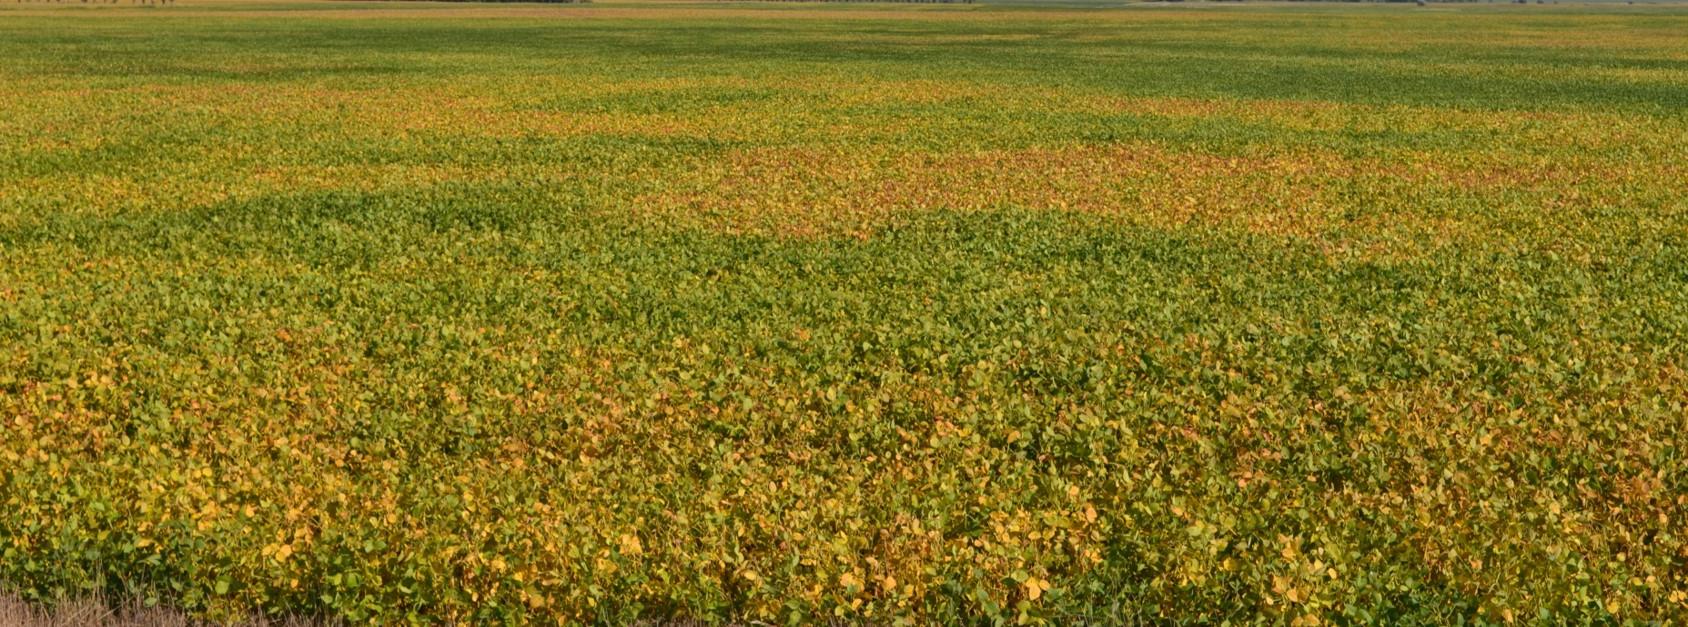 A soybean field with large sections where the foliage has turned various shades of yellow and orange.